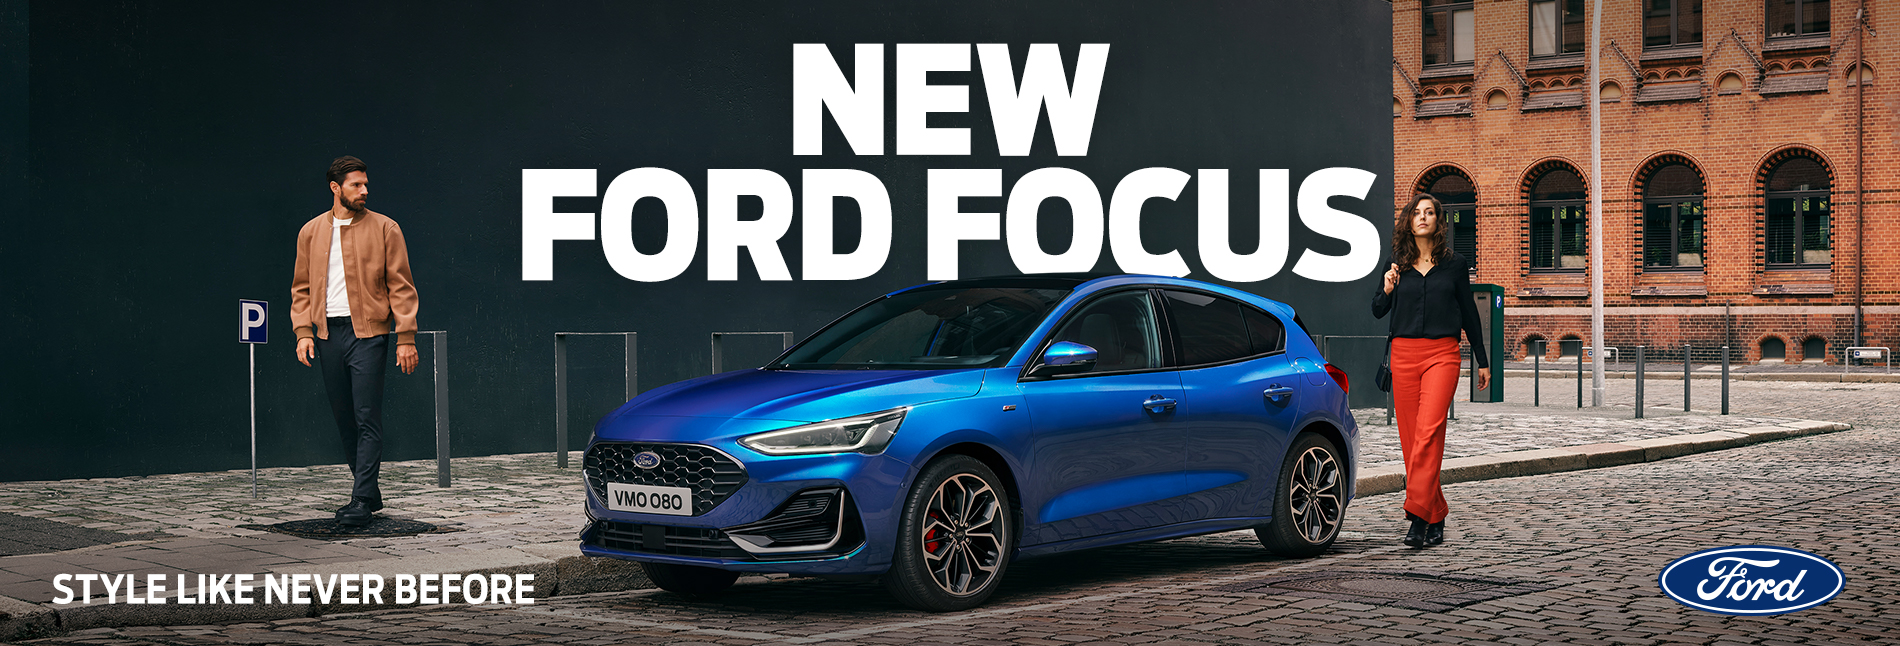 New Ford focus